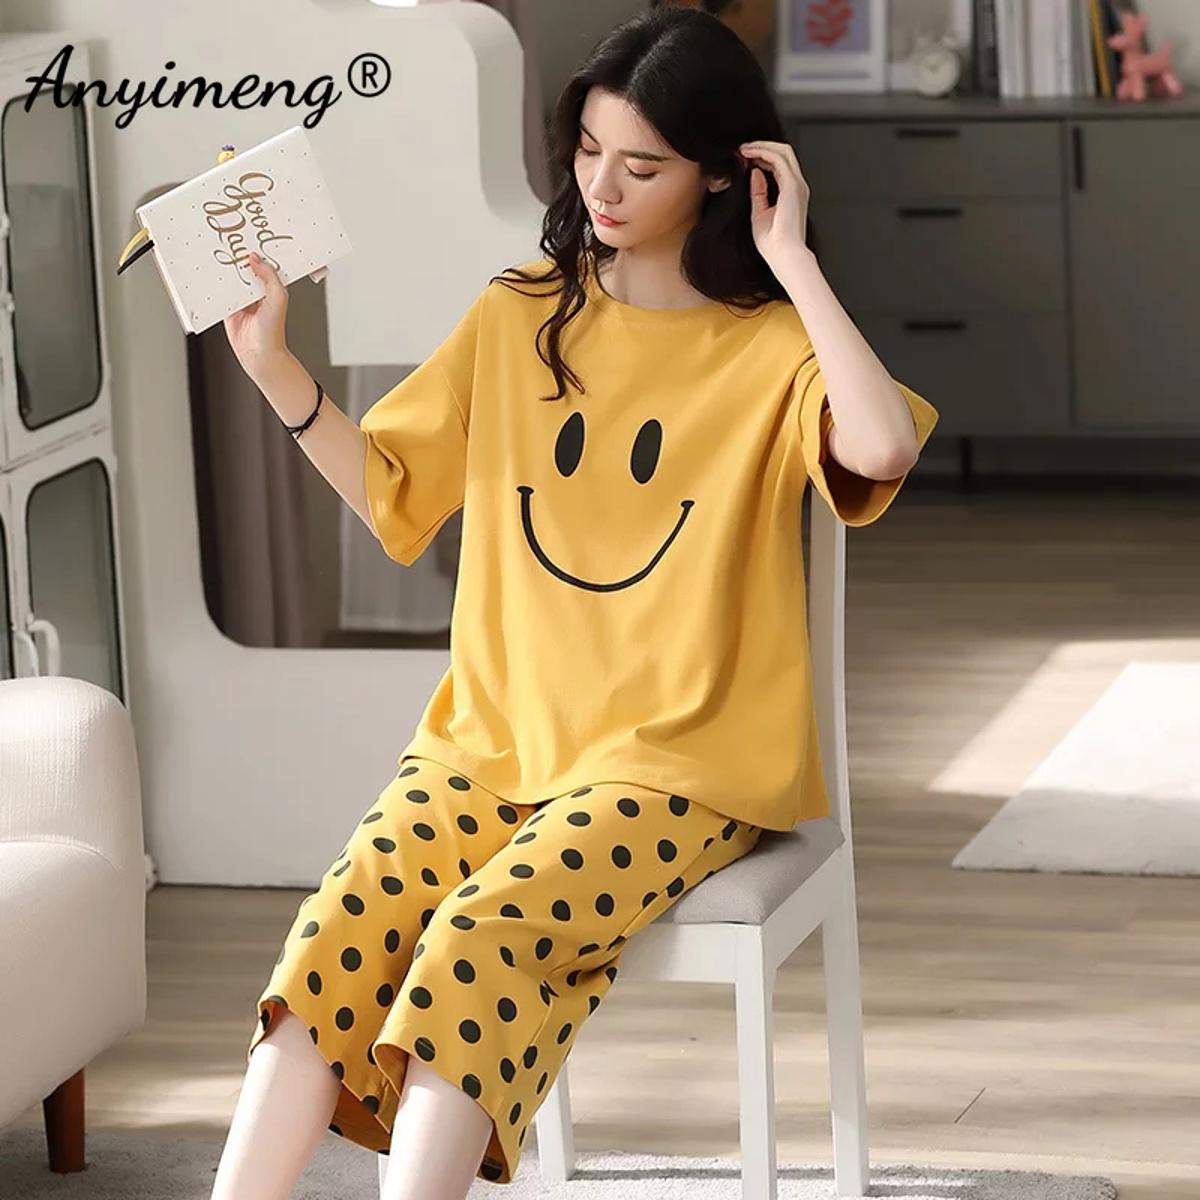 Yellow Colour Black Eye Printed Deisgn Full Sleeves Round Neck Ladies Night Suit comfortable pajama suit printed night dress for women and girls